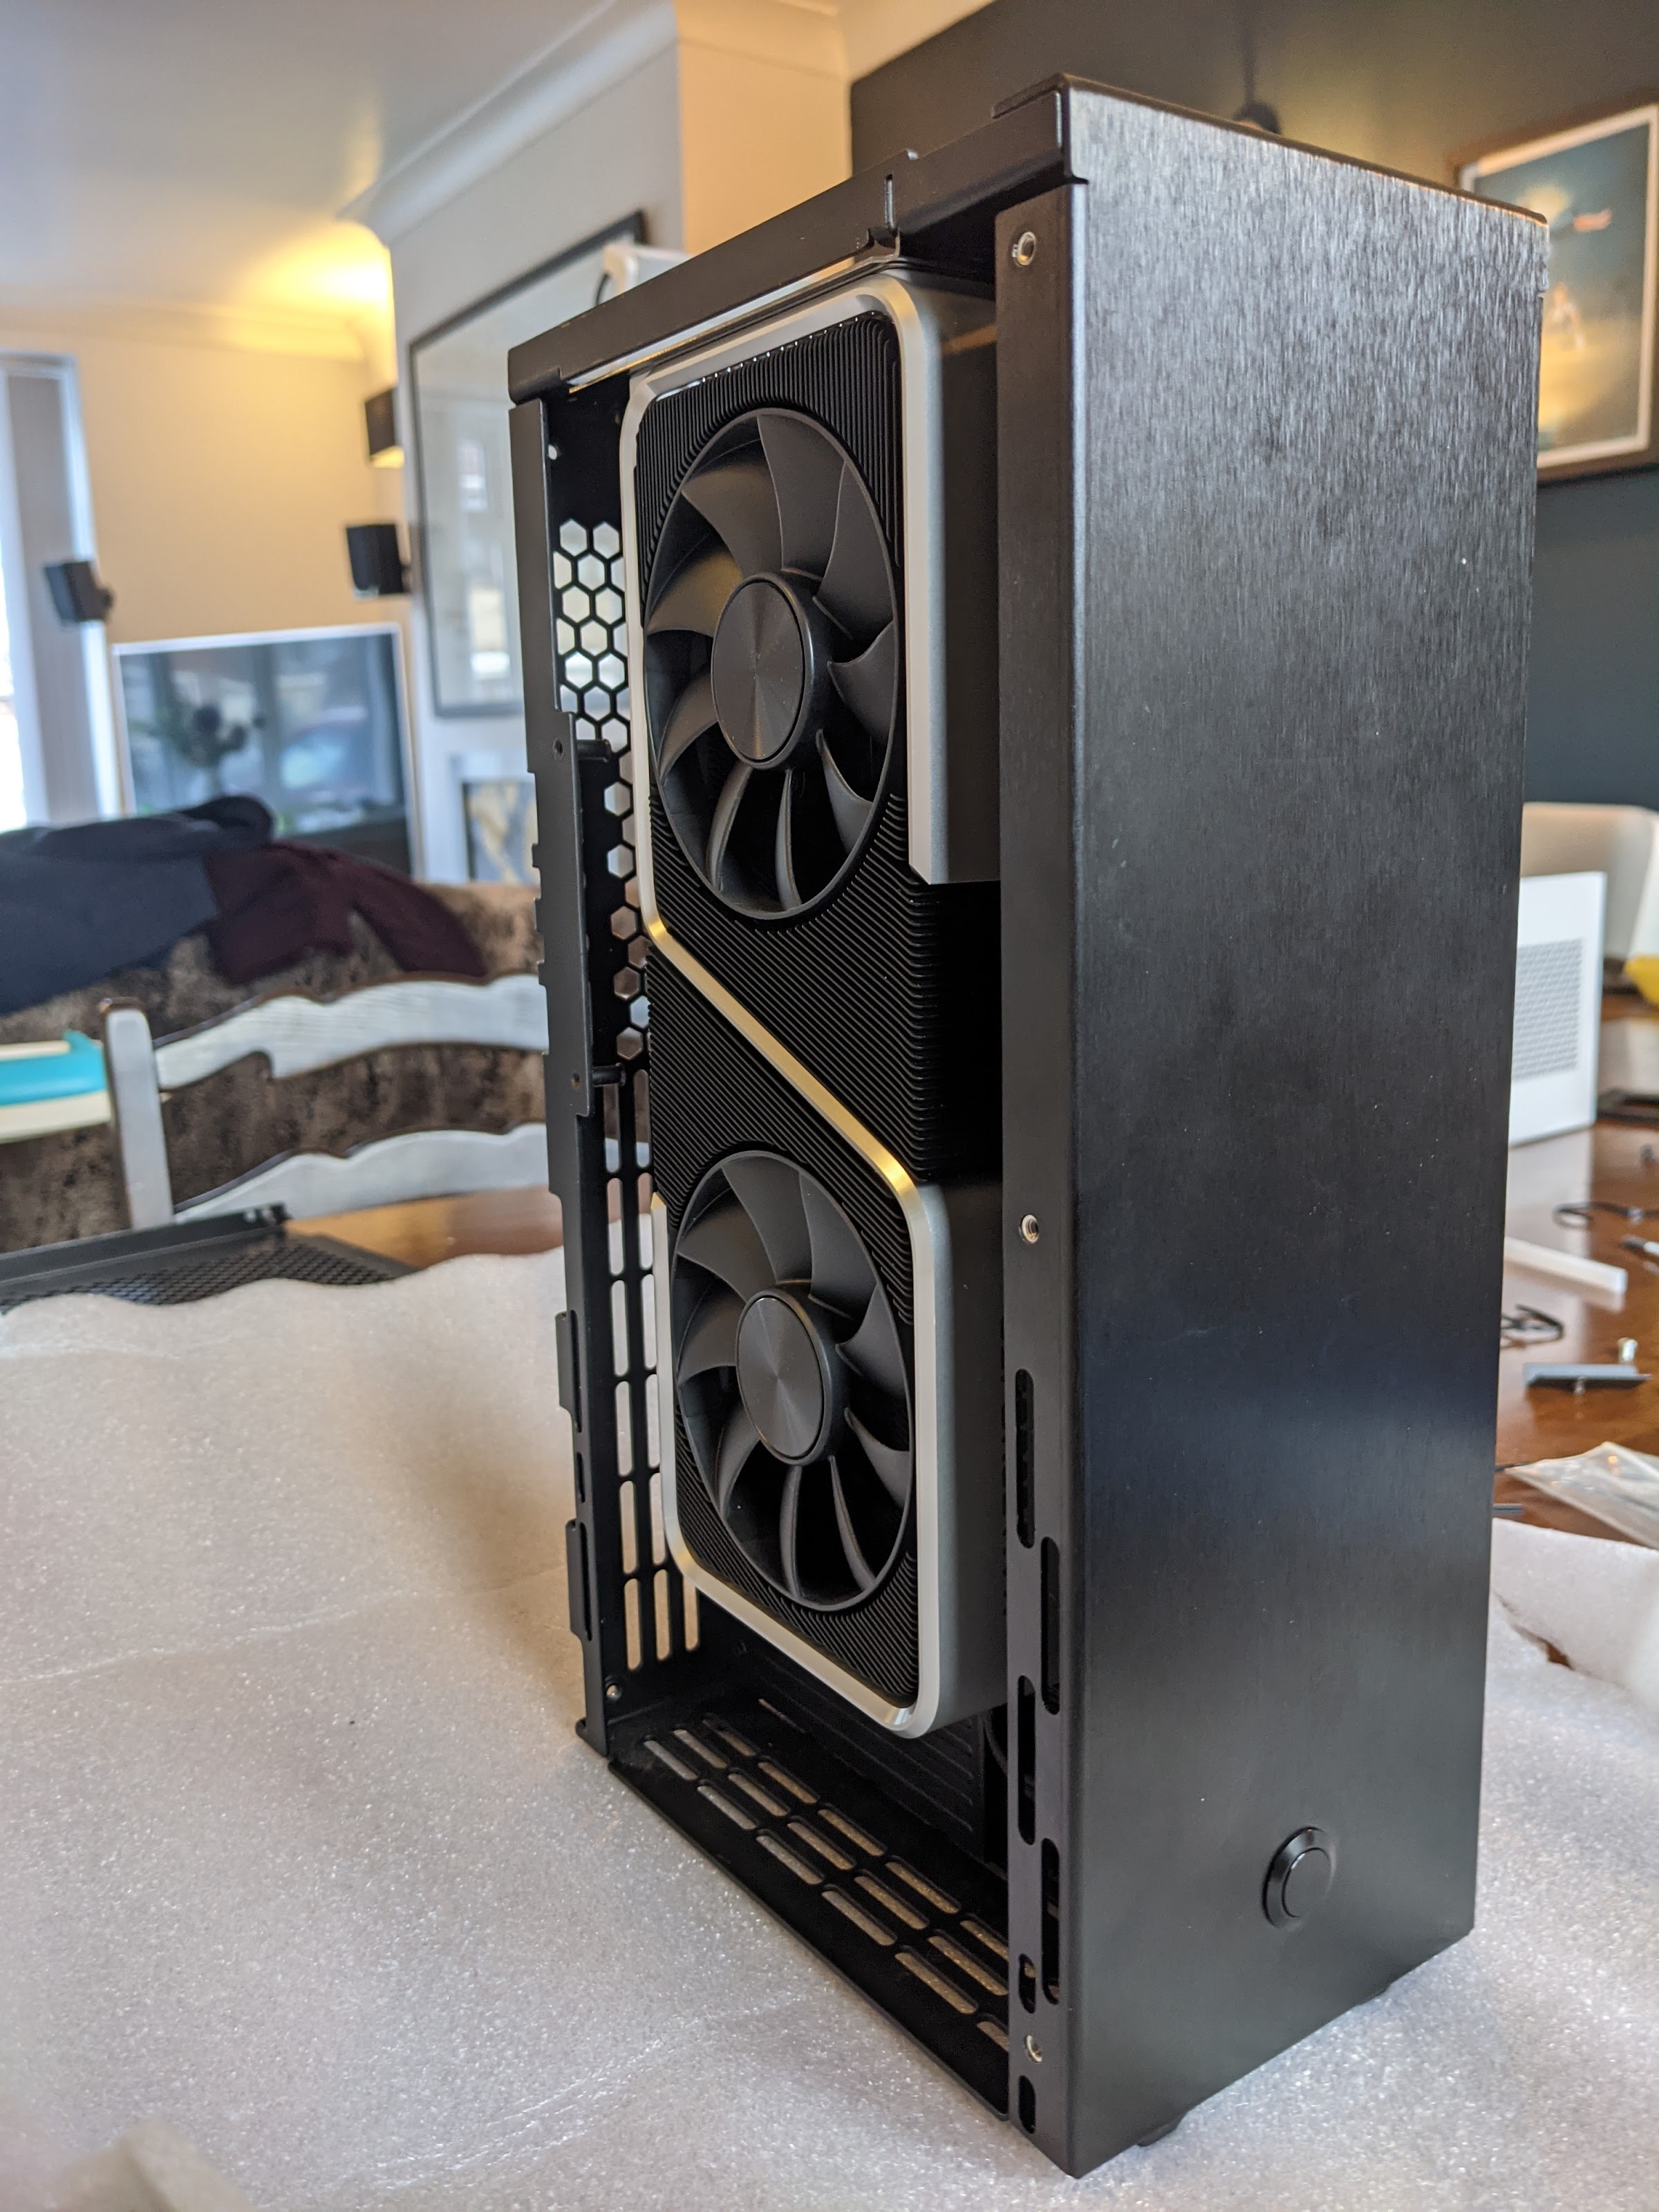 She has a pole between her legs | Overclockers UK Forums